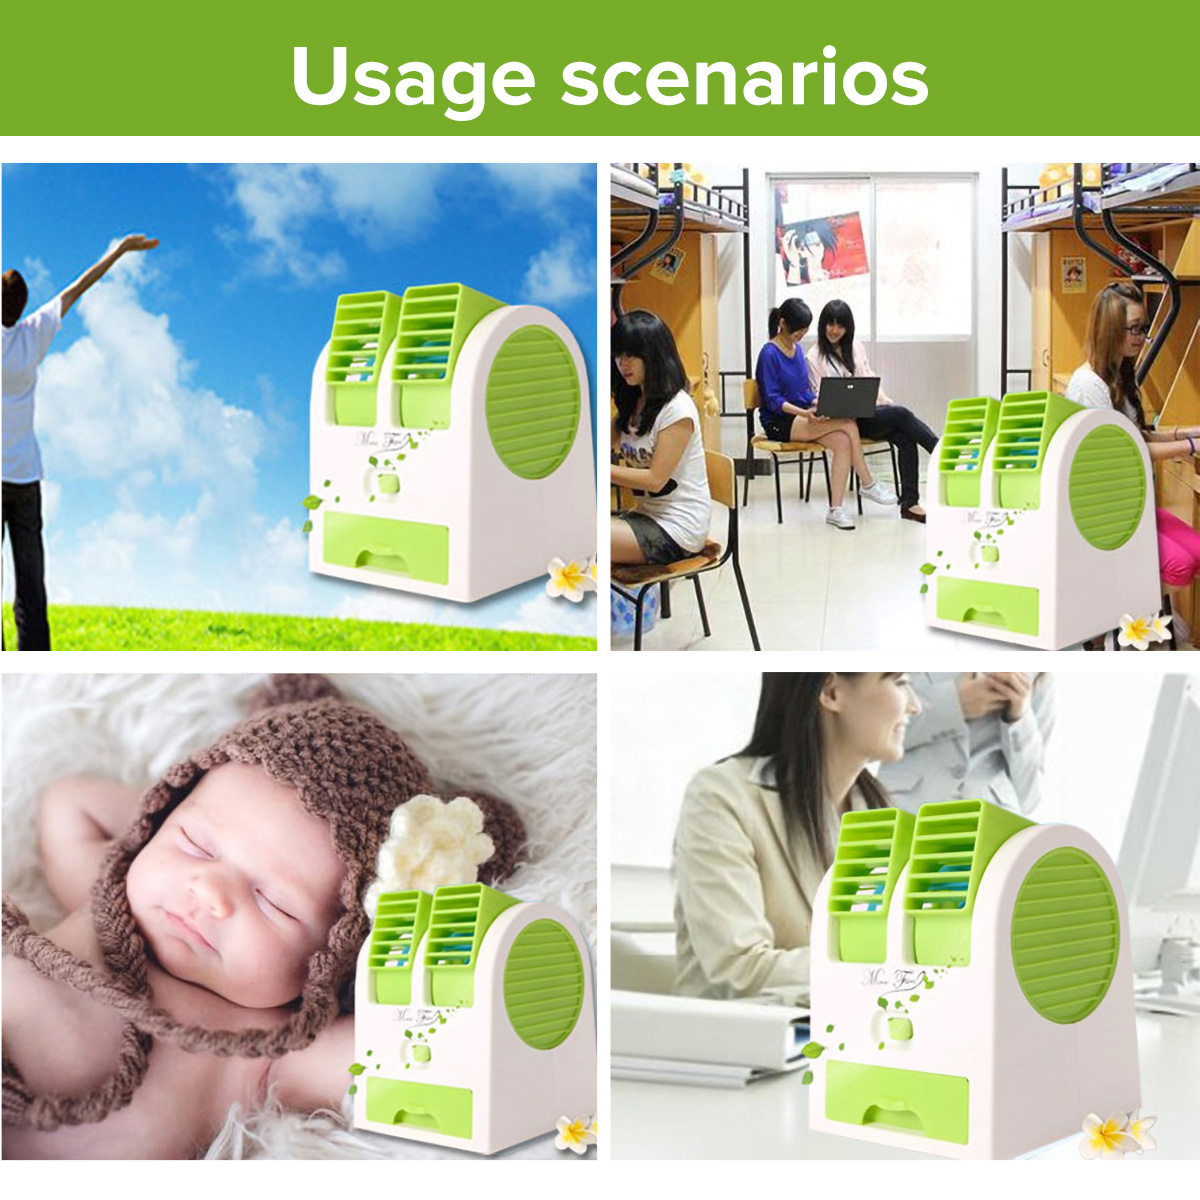 DC-5V-Portable-USB-Rechargeable-Water-Cooler-Cooling-Fan-Desk-Mini-Air-Conditioner-1422332-2